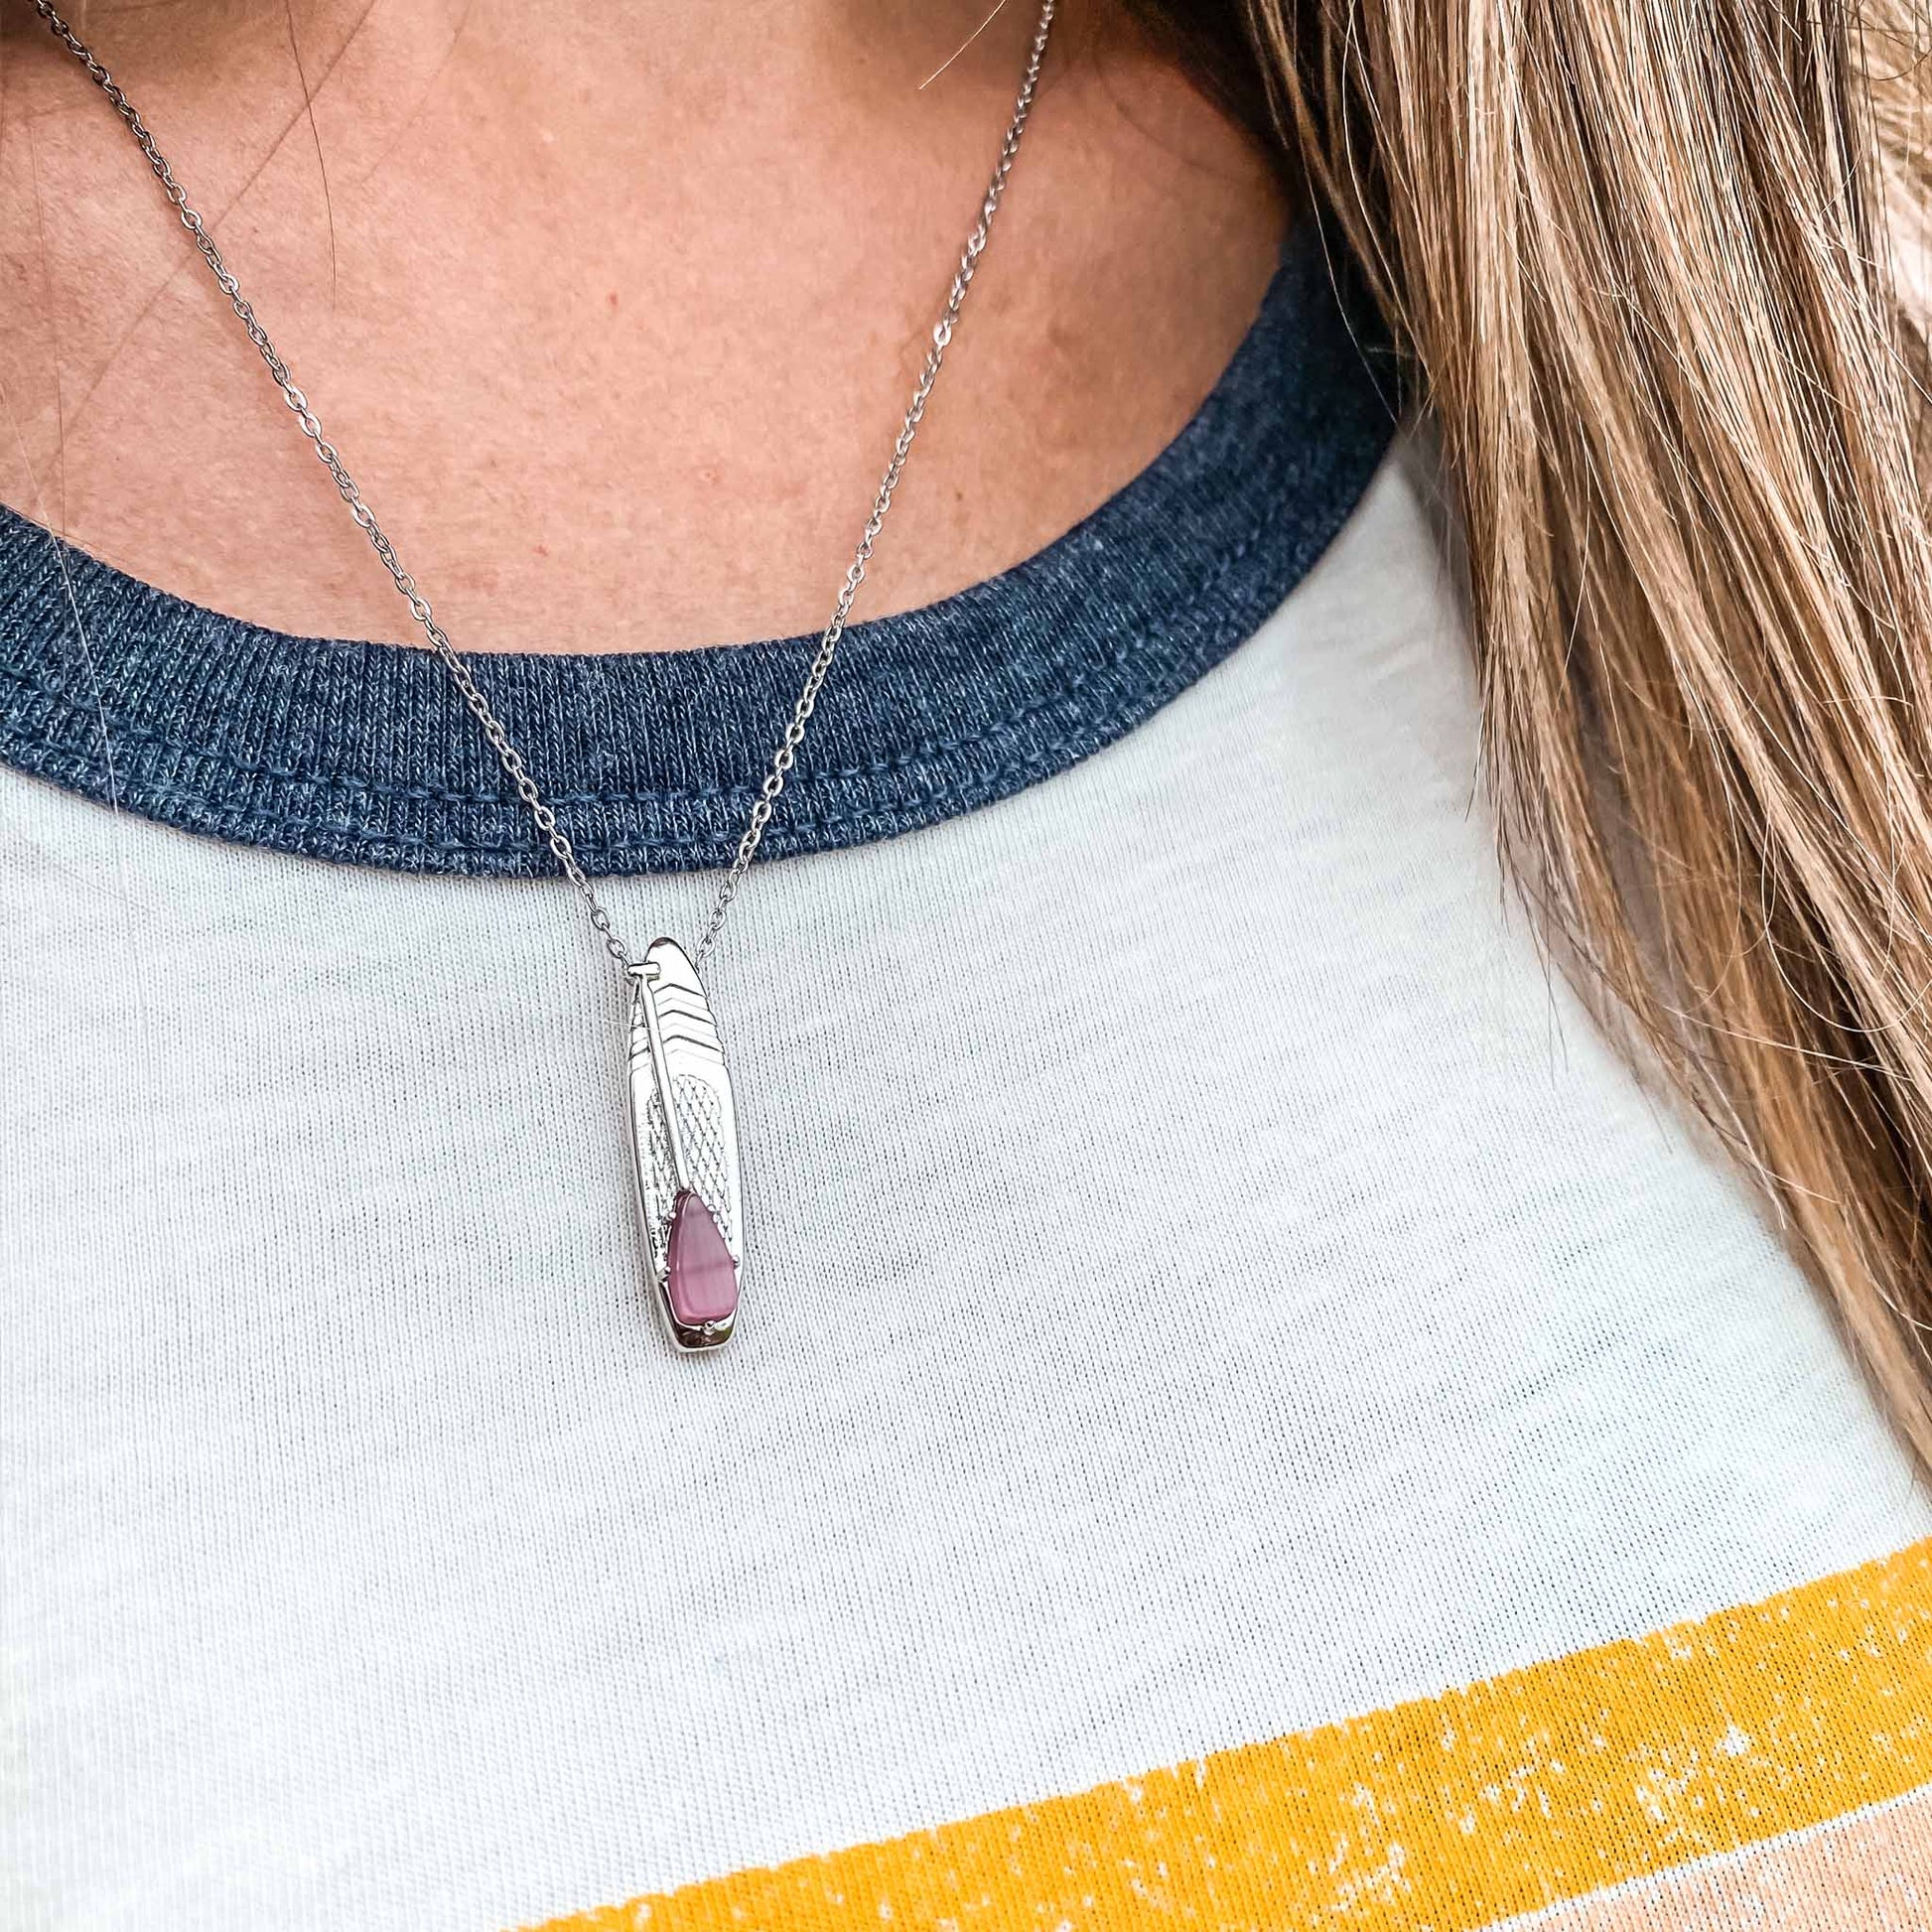 Looking for places to buy or rent a paddle board? This stand up paddle board pendant will be the best and highest performance SUP you'll ever find. Take your paddle board with you, even when you're not surfing, racing or touring. Shop October's birthstone SUP jewelry online or at a surf shop near you.